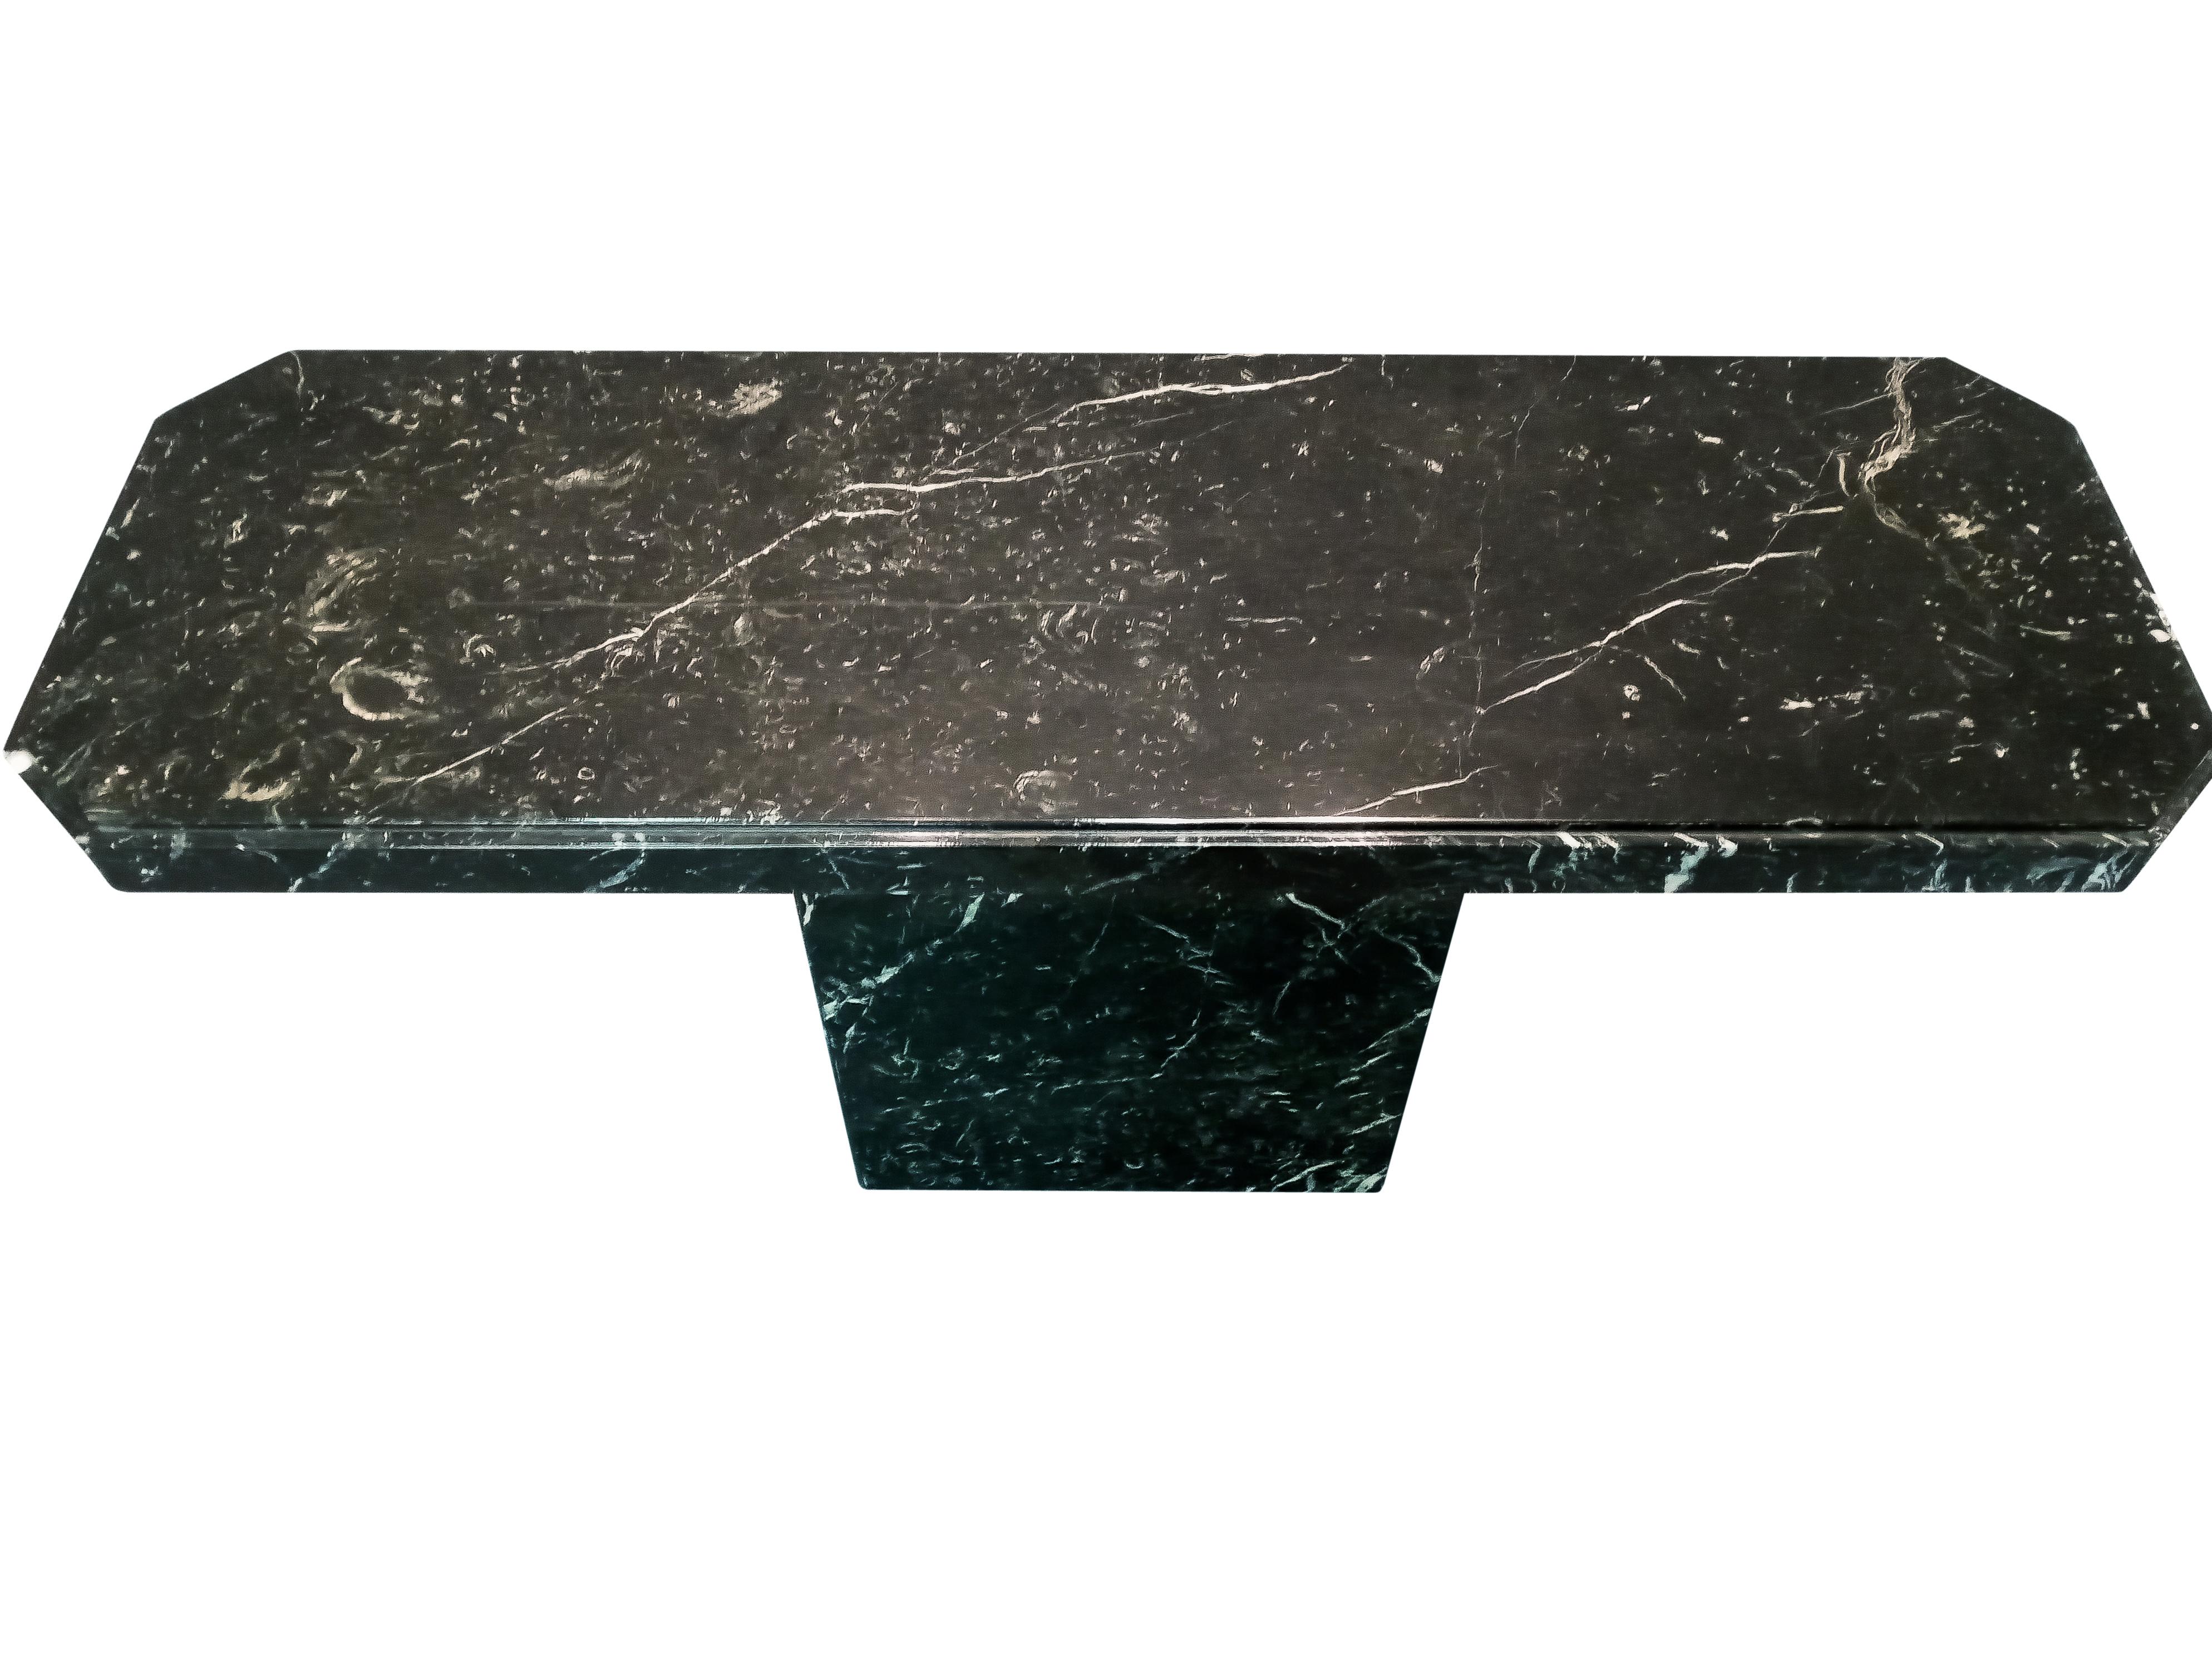 Vintage Italian marble console table by Ello. With dramatic black marble and white veining, this bold and practical table can be used in any number of locations in a fine home. High gloss acrylic finish makes it perfect for a high-volume area, where